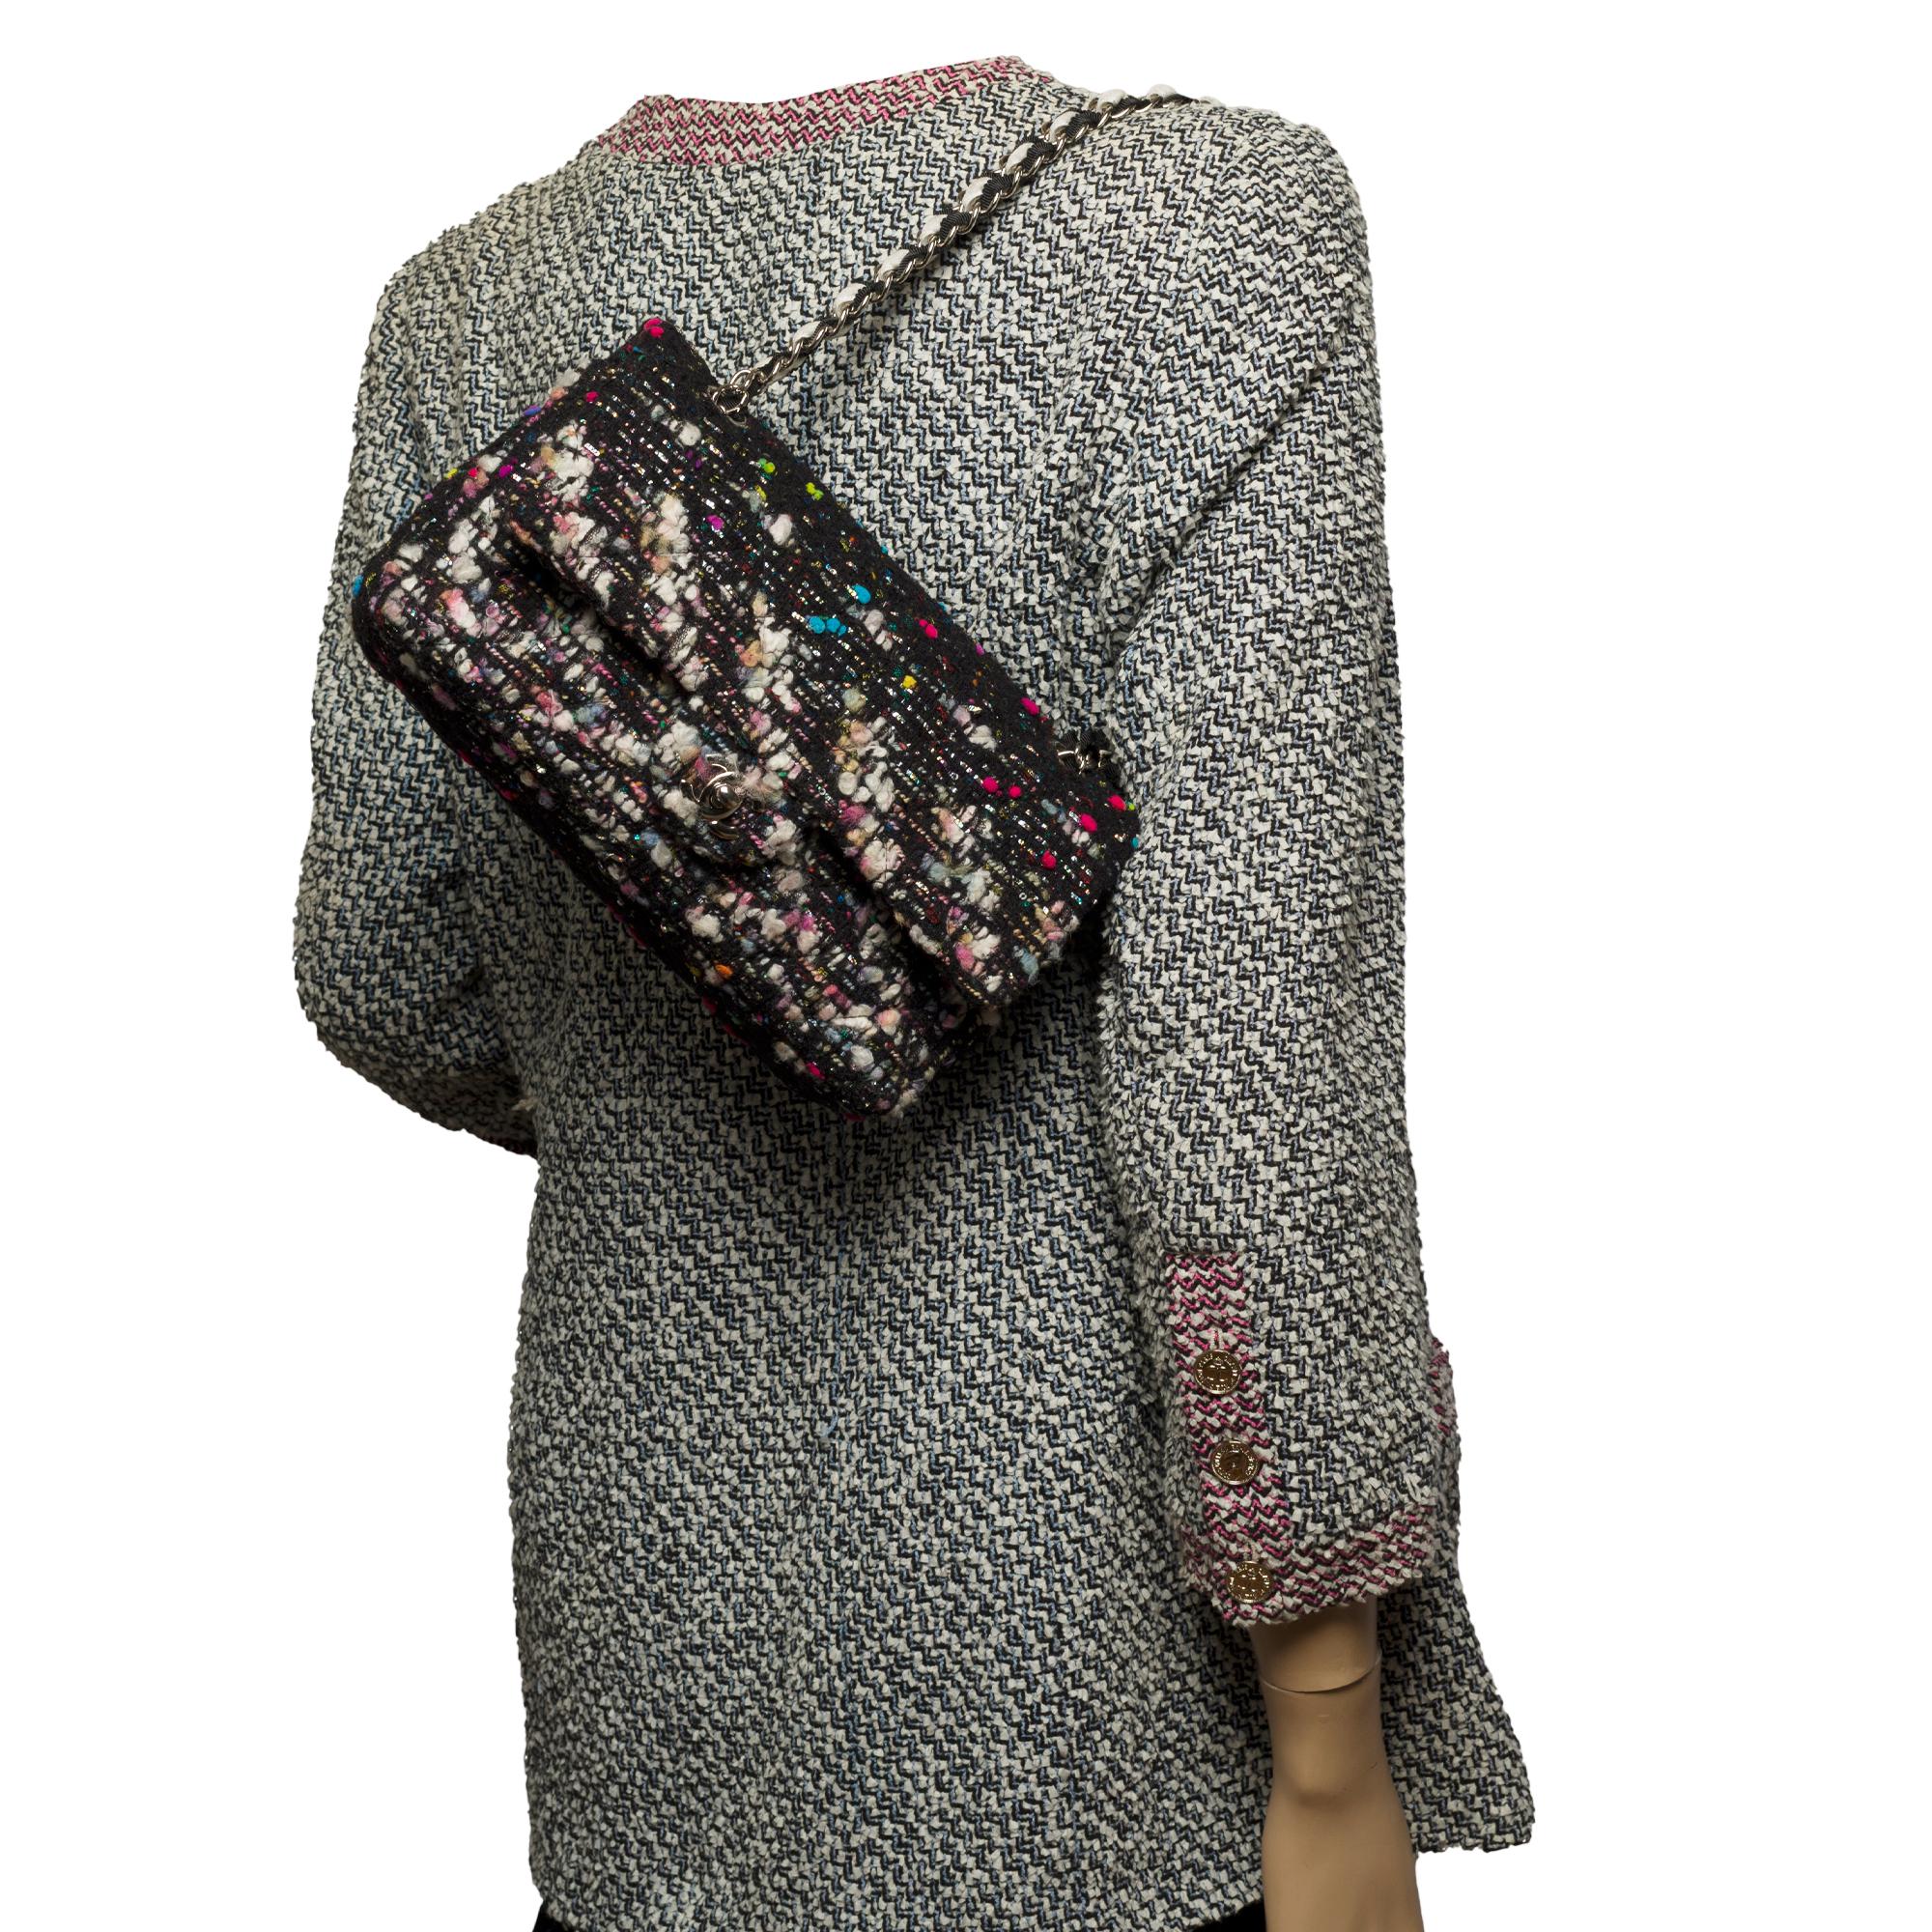 Limited Edition Chanel Timeless Shoulder bag in Multicolor Tweed with SHW 8